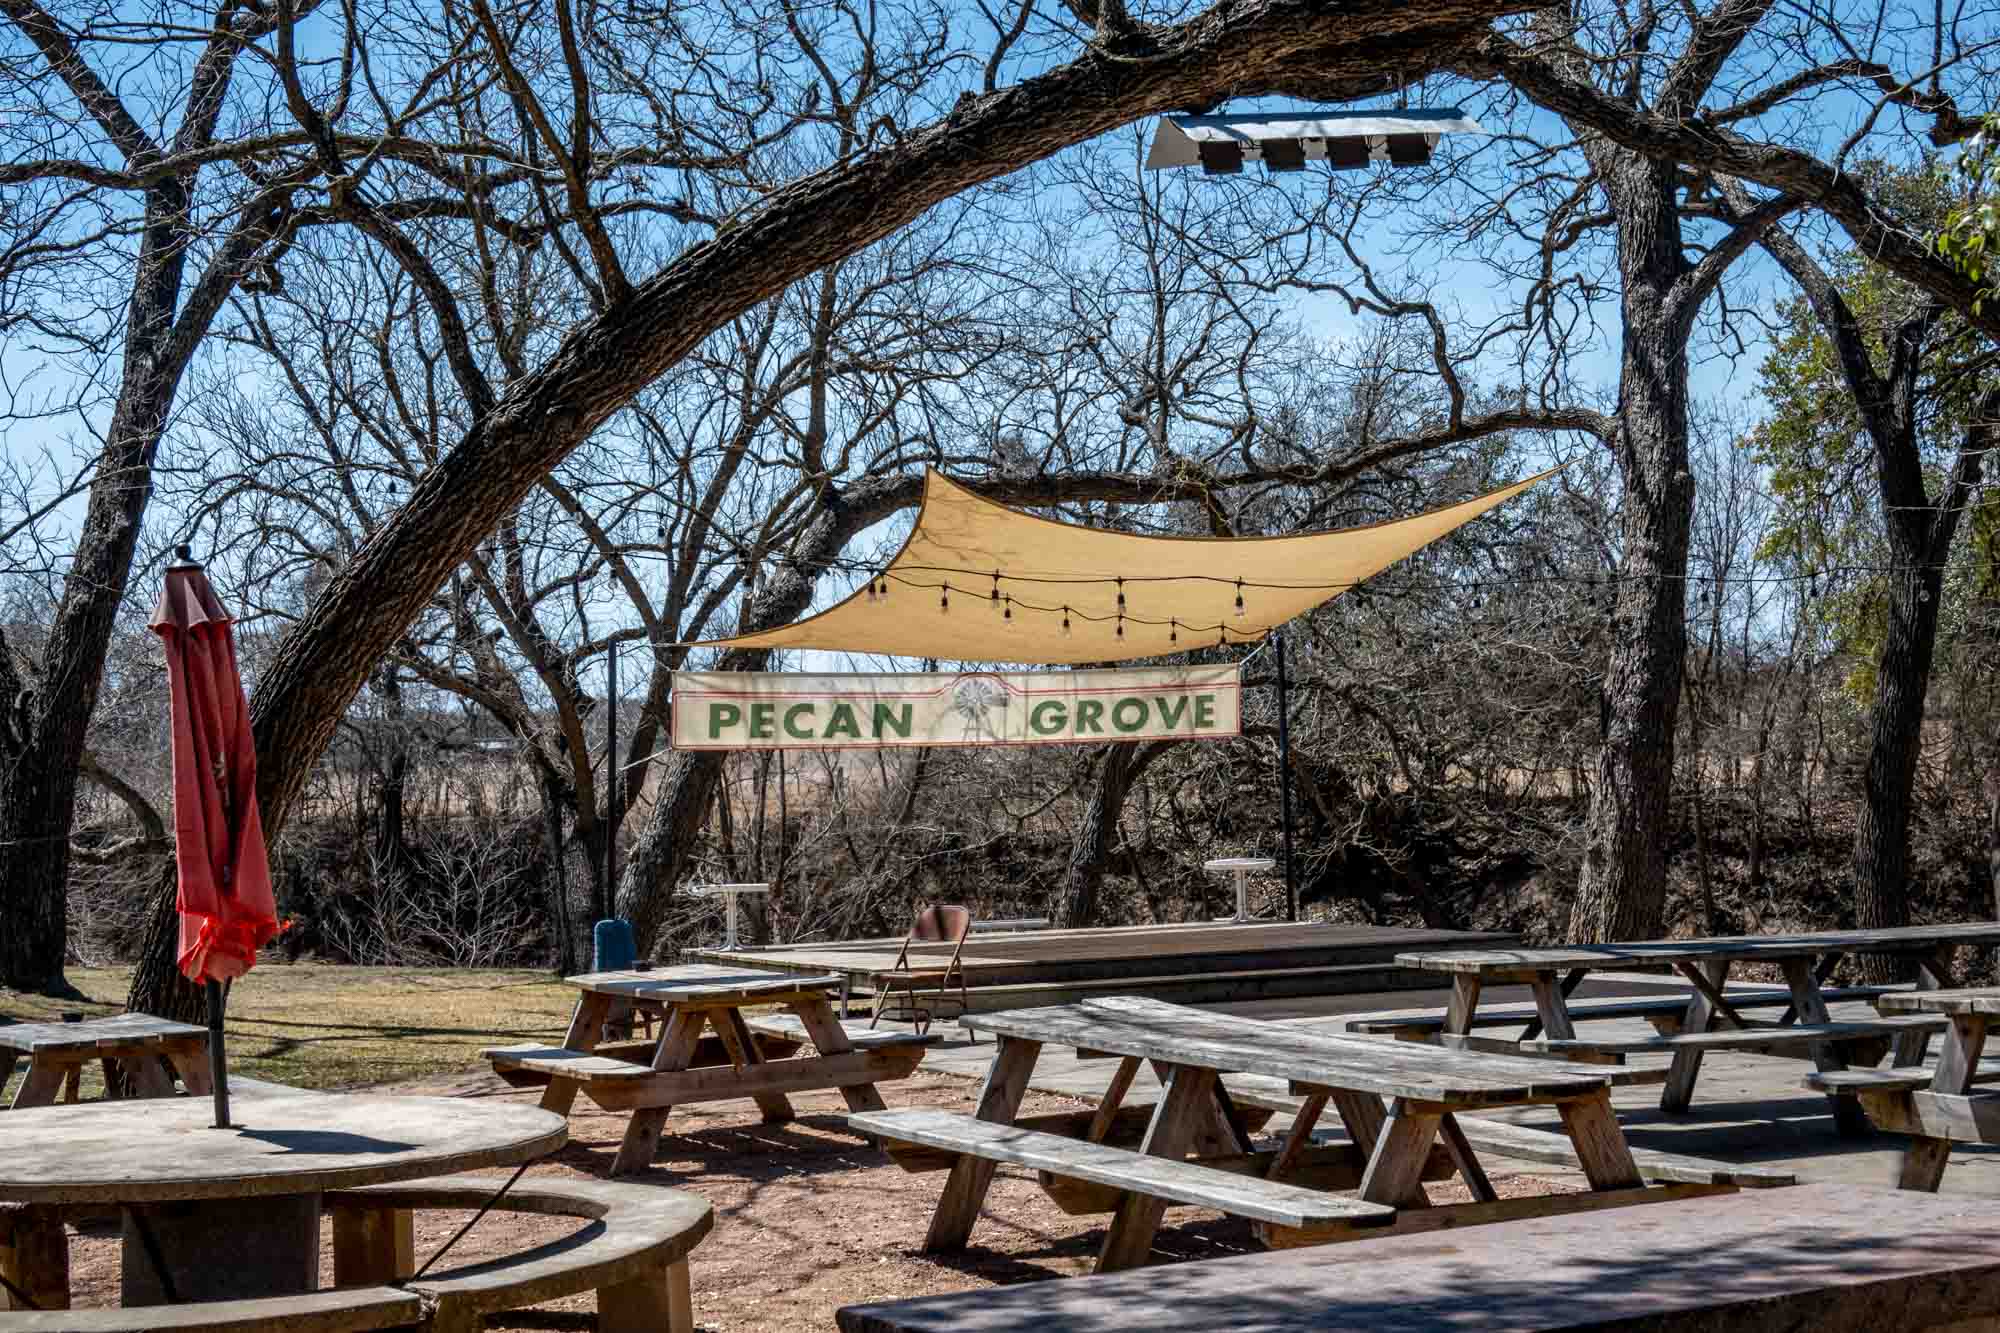 Picnic tables under trees with a wooden stage and sign for "Pecan Grove"